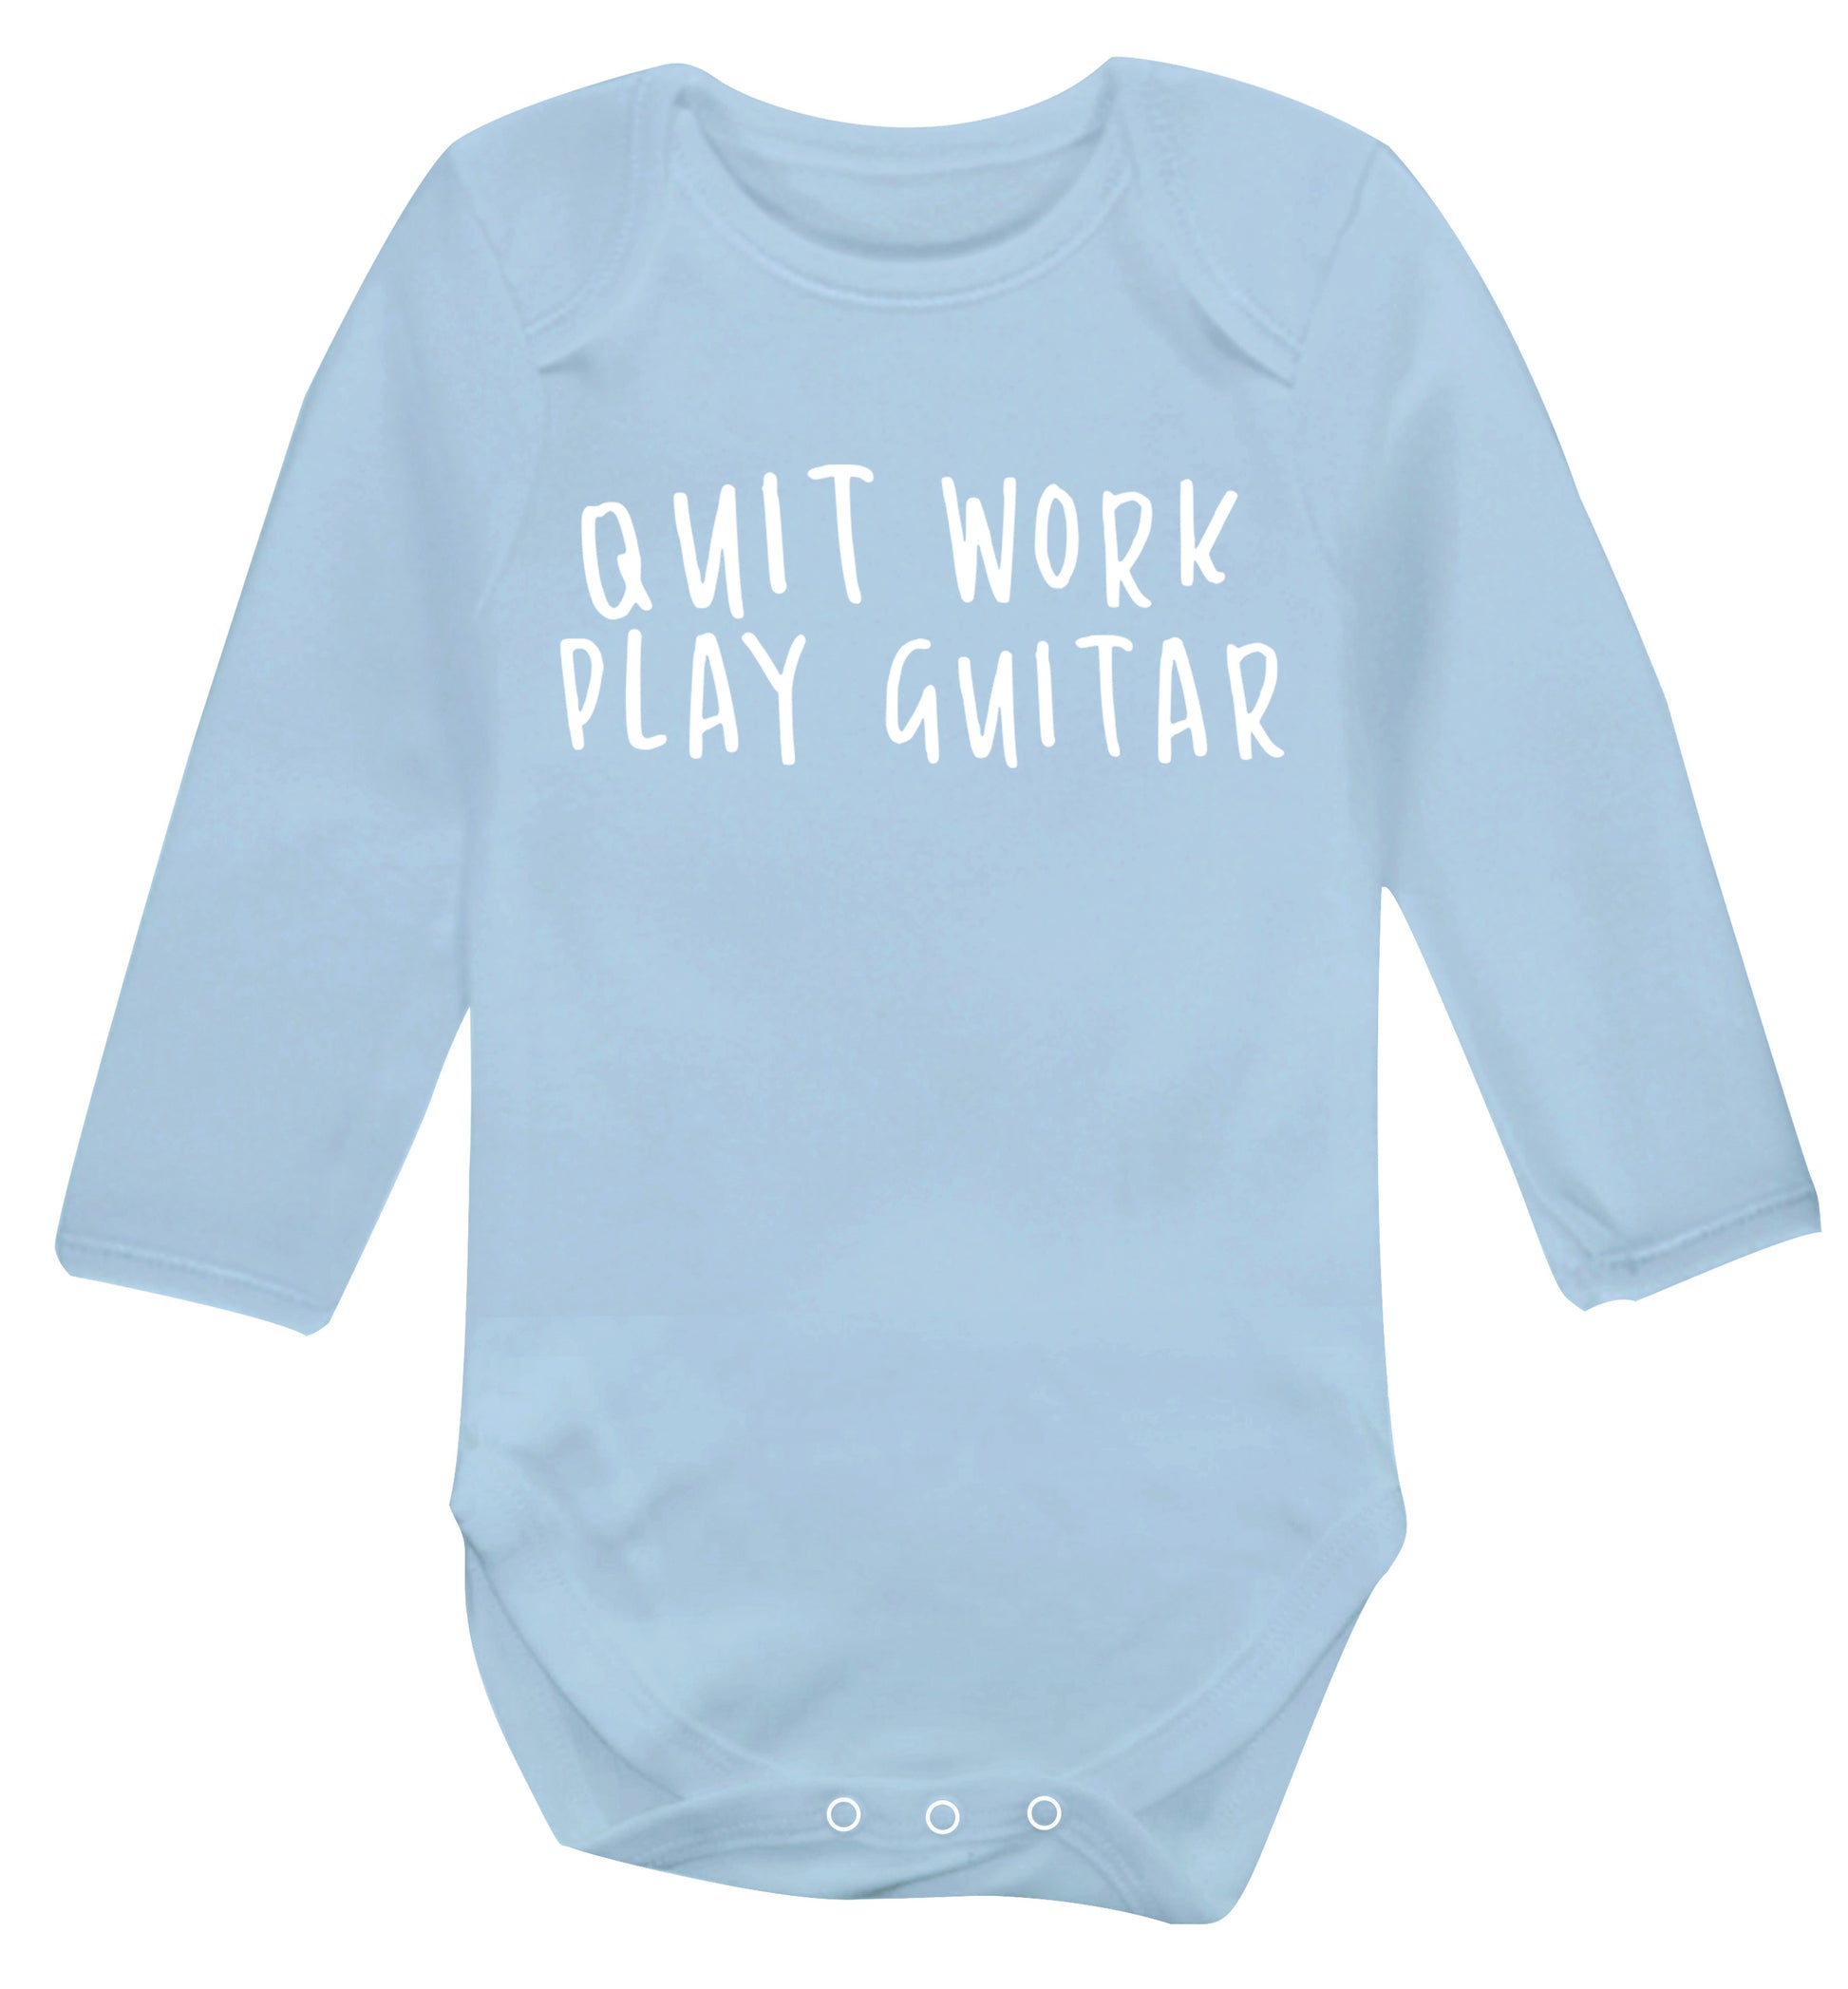 Quit work play guitar Baby Vest long sleeved pale blue 6-12 months